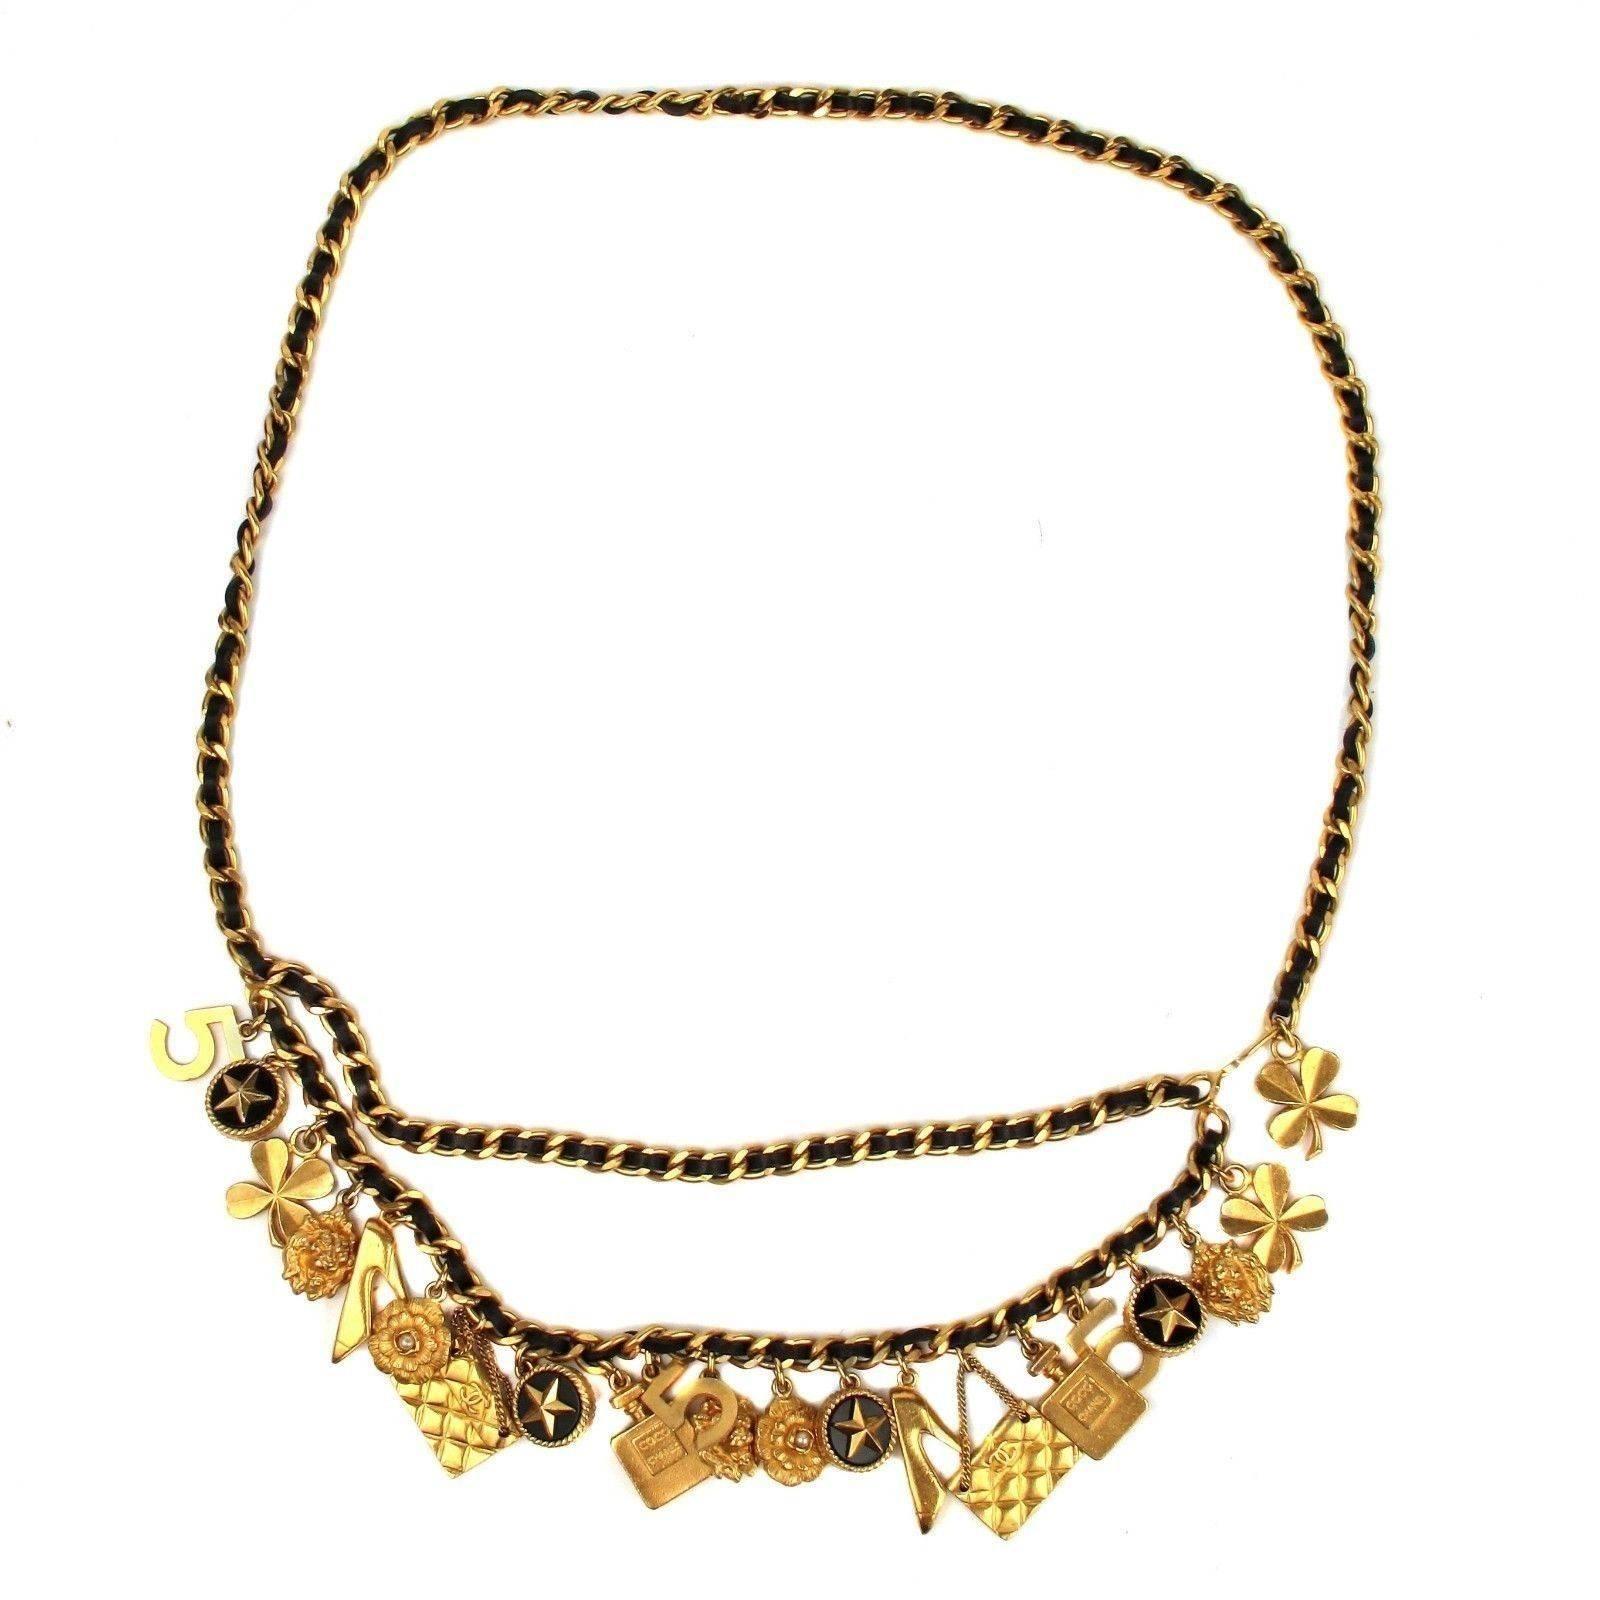 Chanel - Charm Necklace / Belt

Color: Black / Gold

Material: Leather / Metal

------------------------------------------------------------

Details:

- gold tone hardware

- various charms throughout 

- hook closure

- can be worn